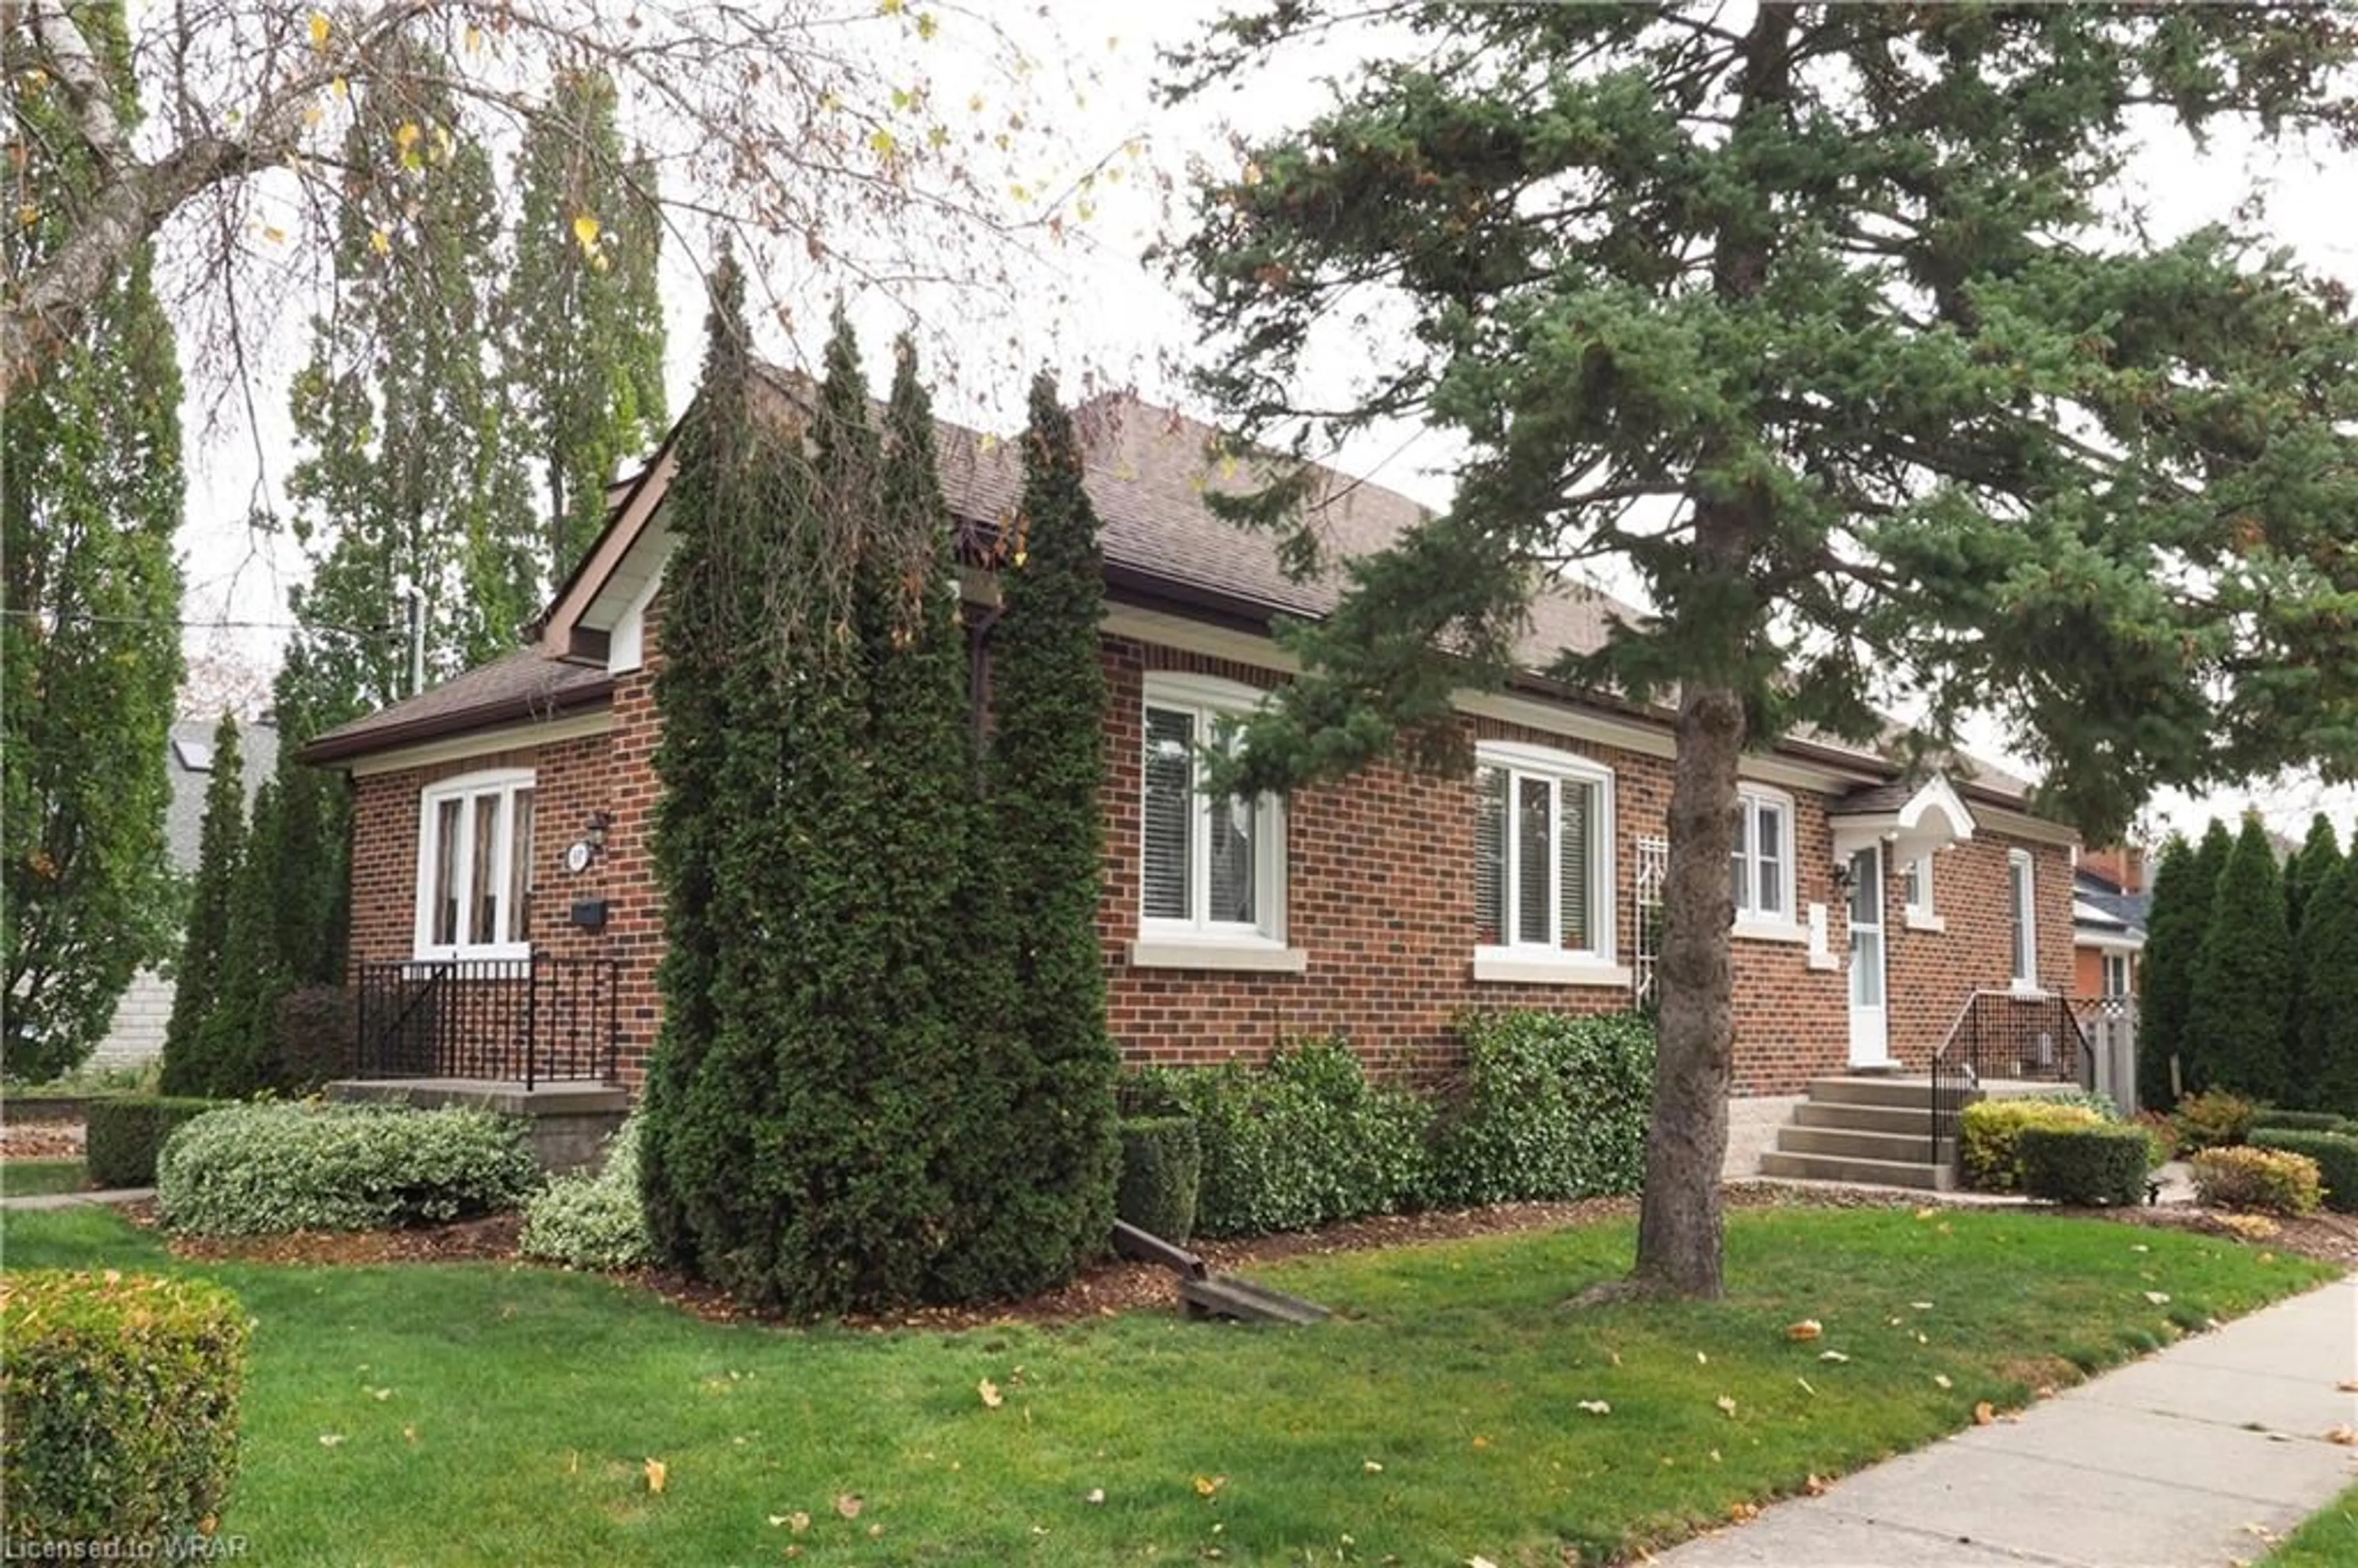 Home with brick exterior material for 537 Argyle St, Cambridge Ontario N3H 1R6